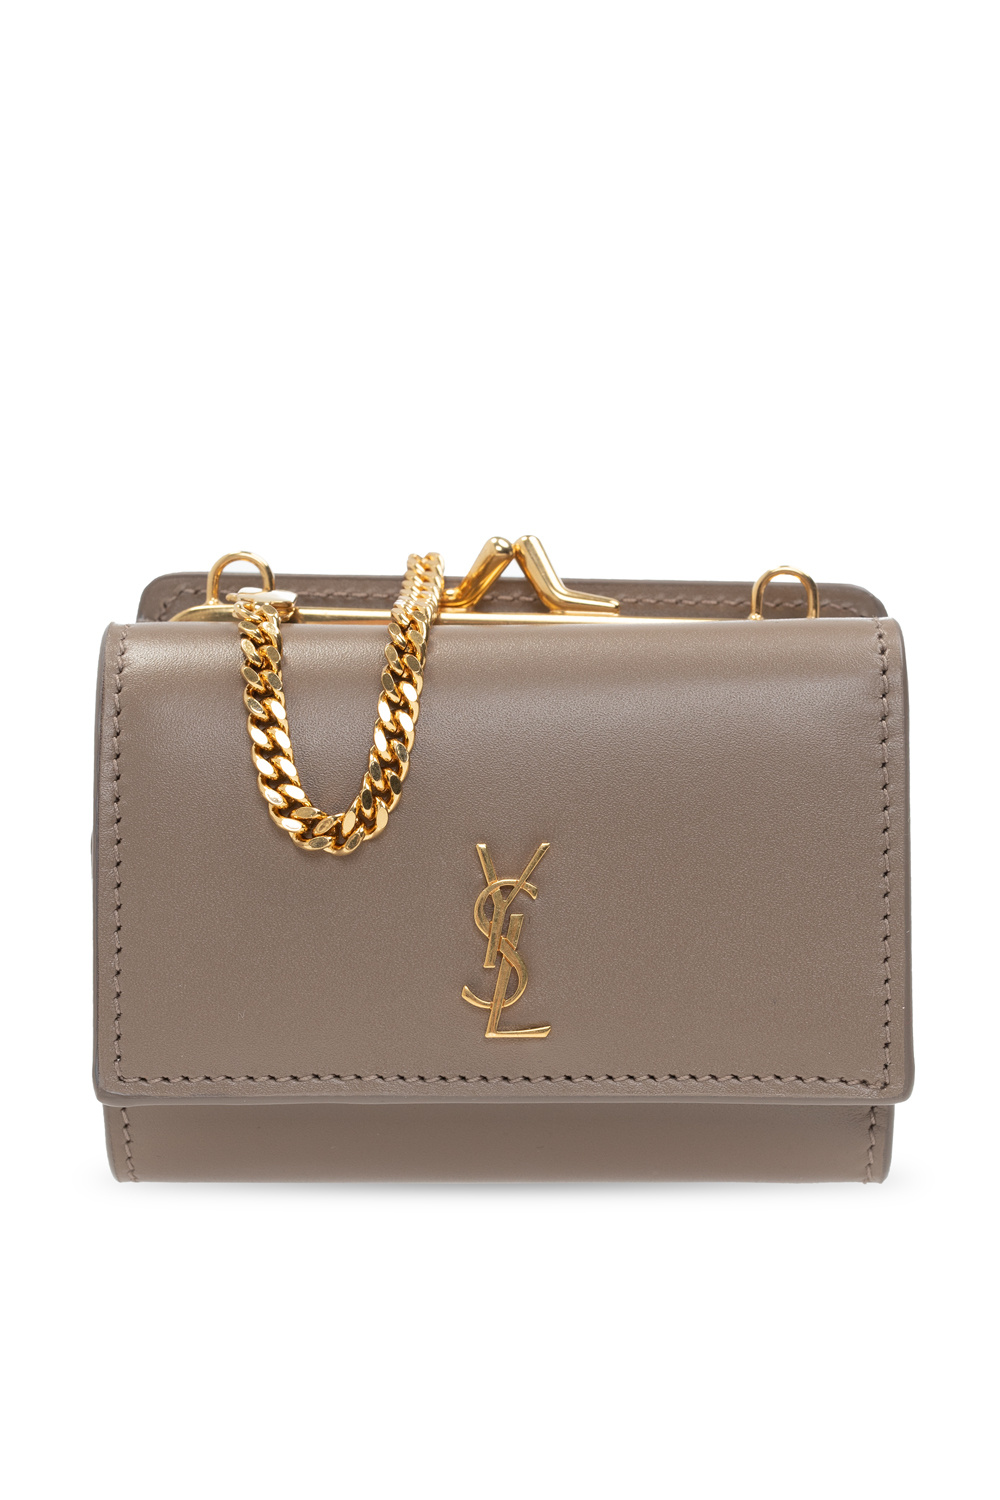 Yves Saint Laurent YSL Chevron Leather Bill Pouch in white calf